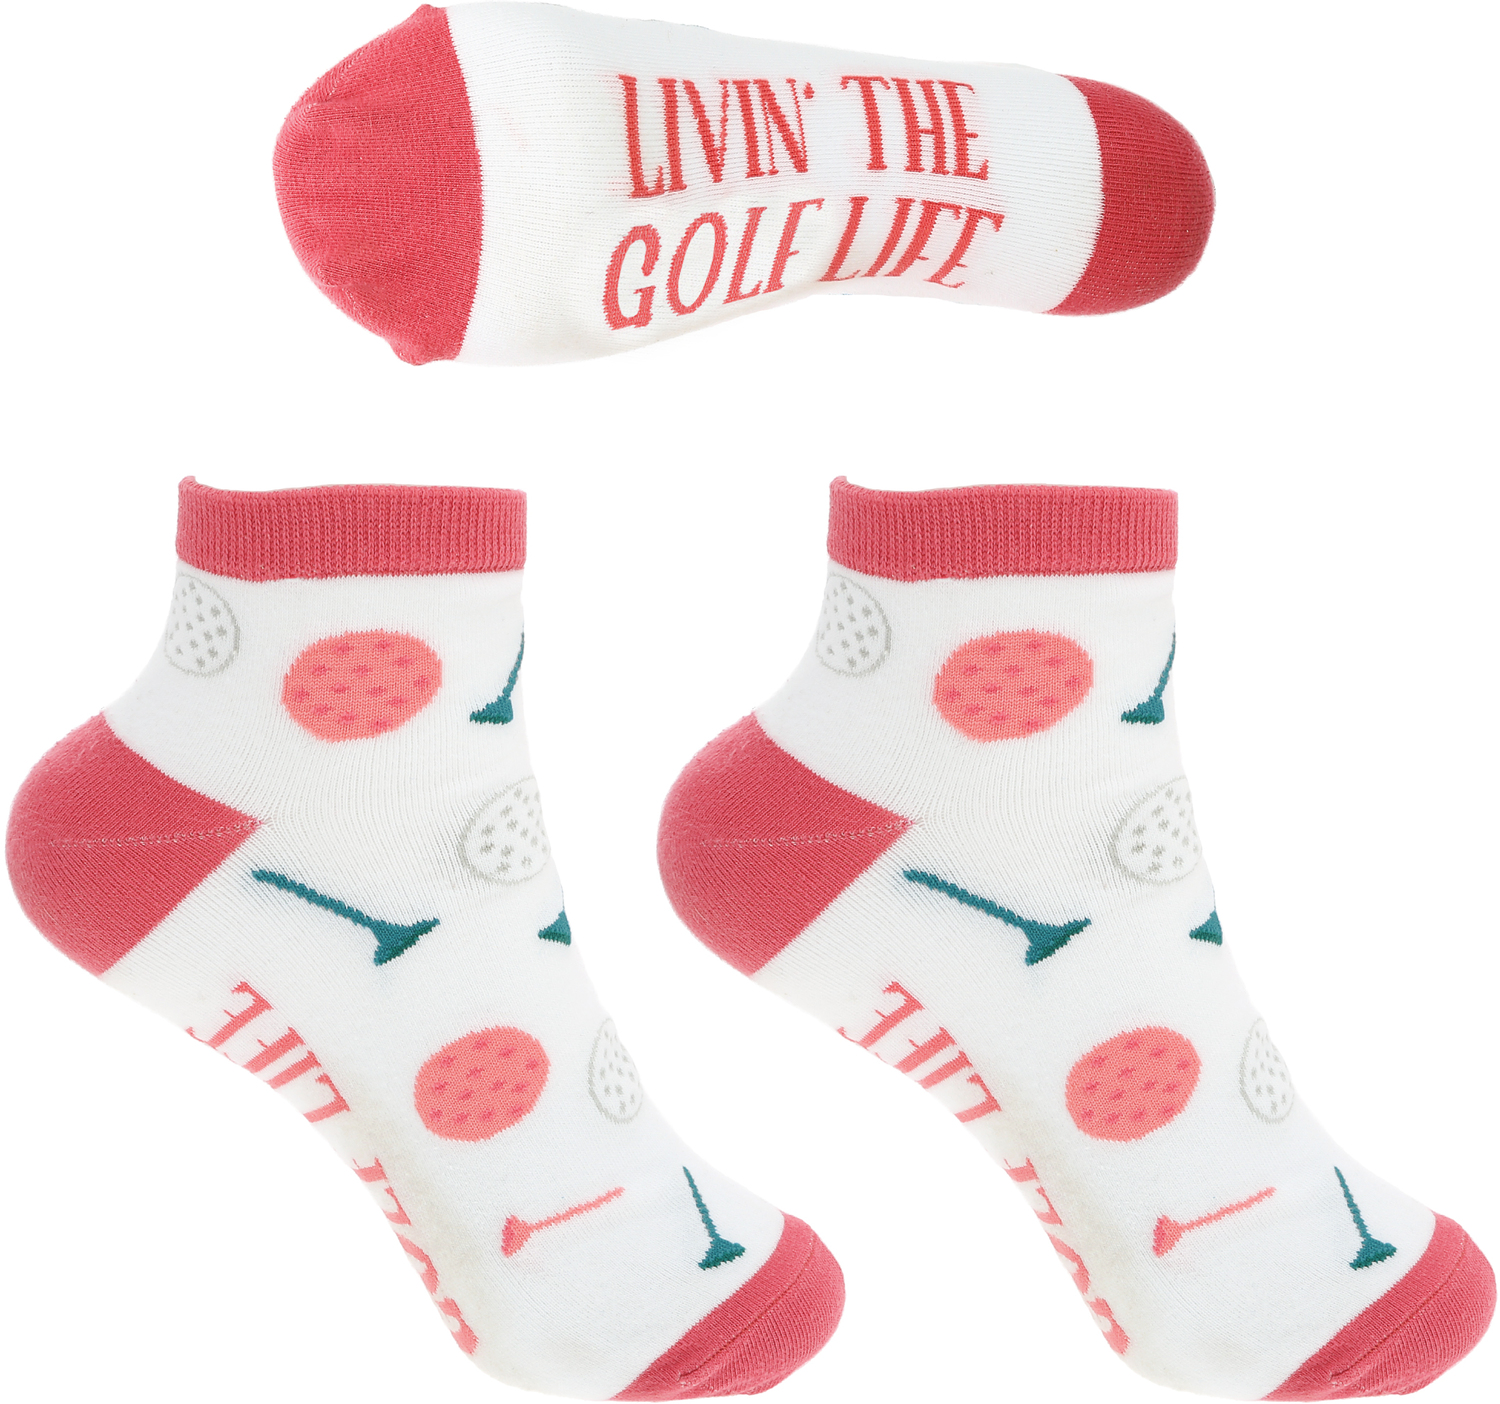 Golf Life by Queen of the Green - MHS - Golf Life - Women's Ankle Socks